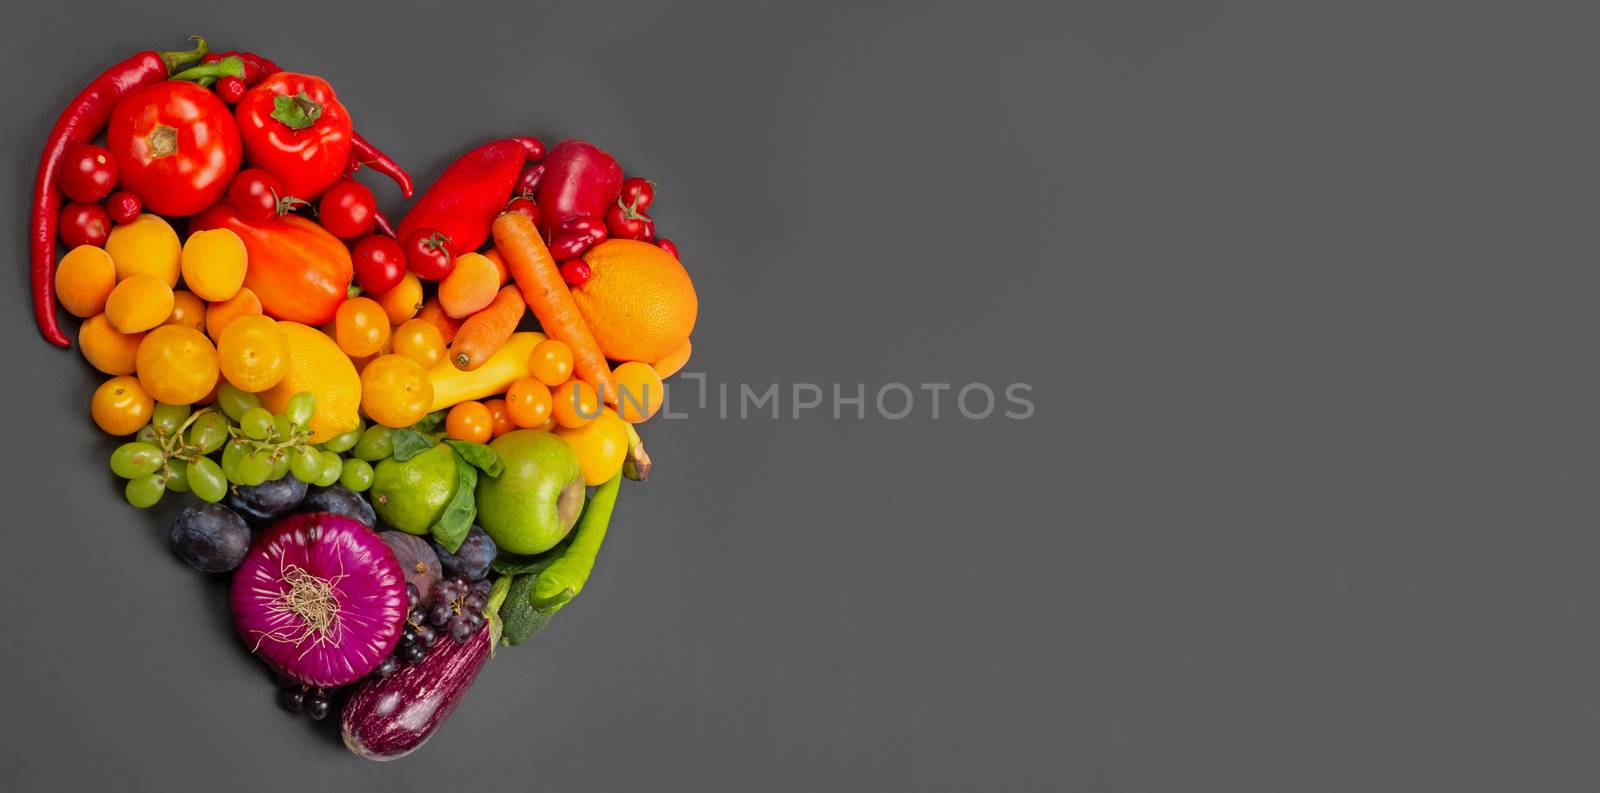 Rainbow heart of fruits and vegetables by destillat